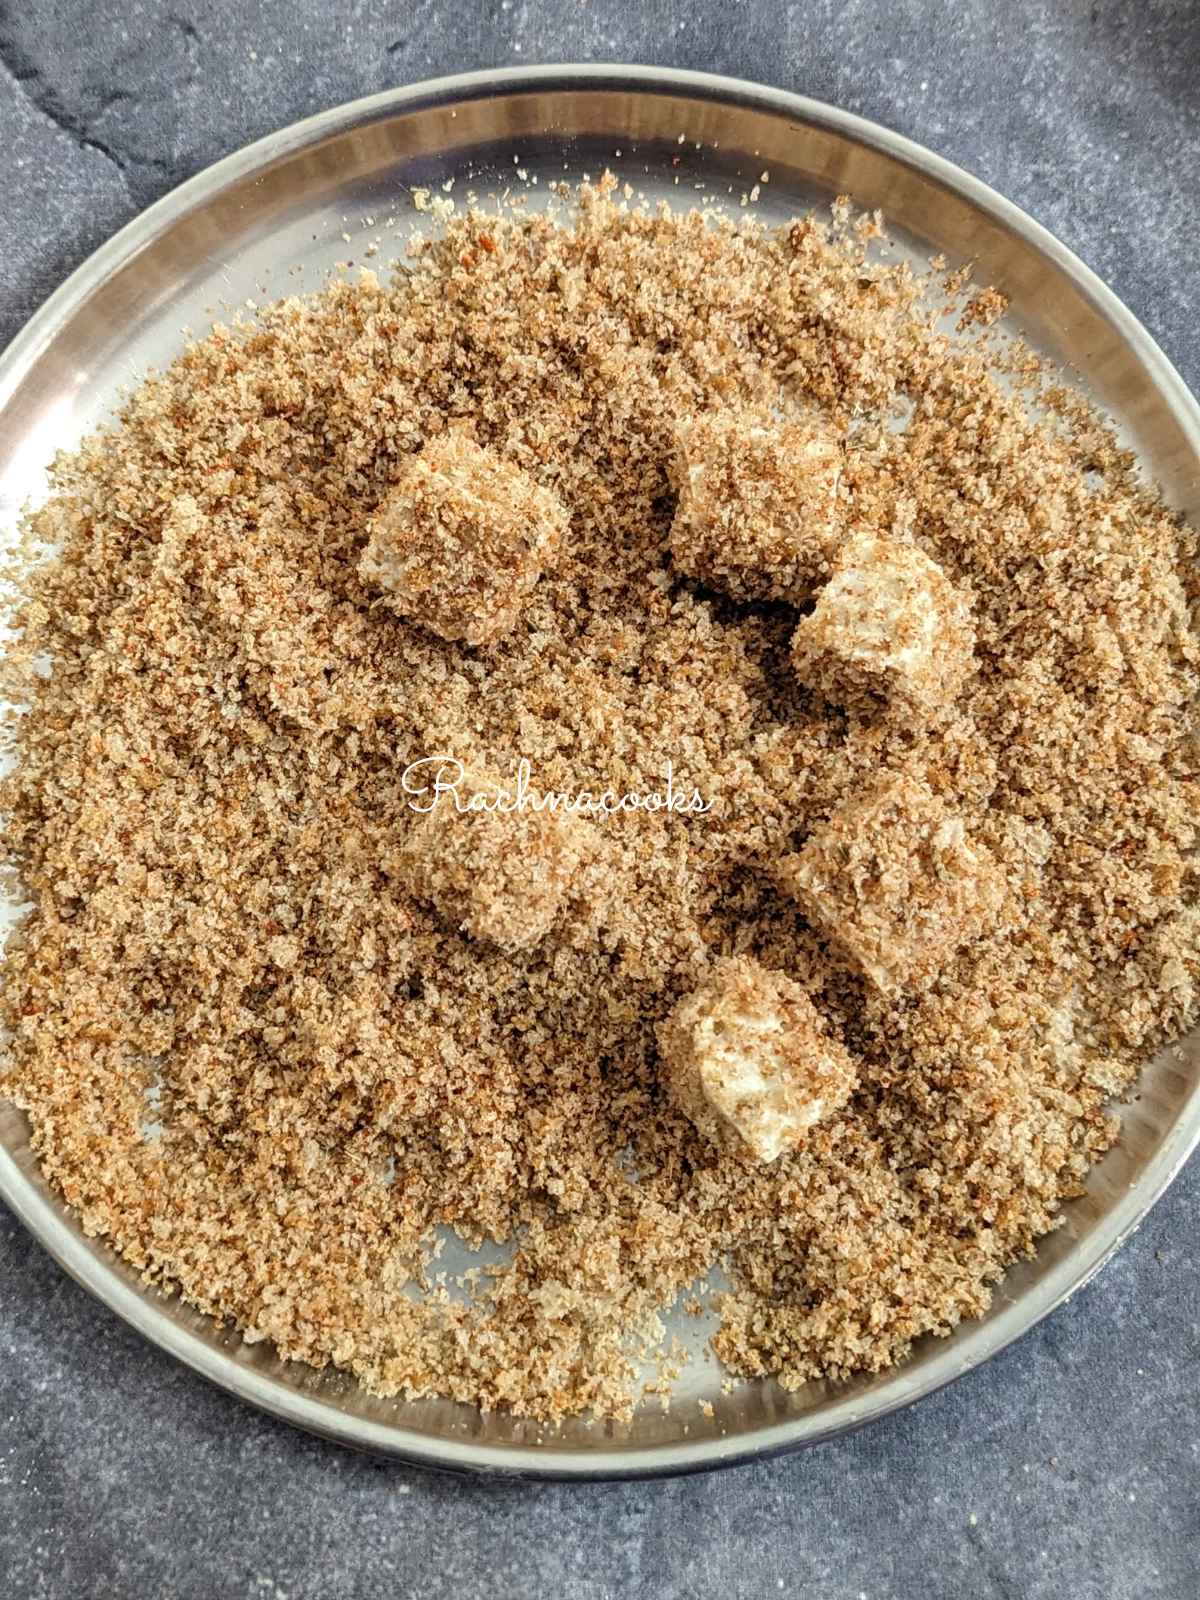 tofu bites immersed in breadcrumbs on a plate